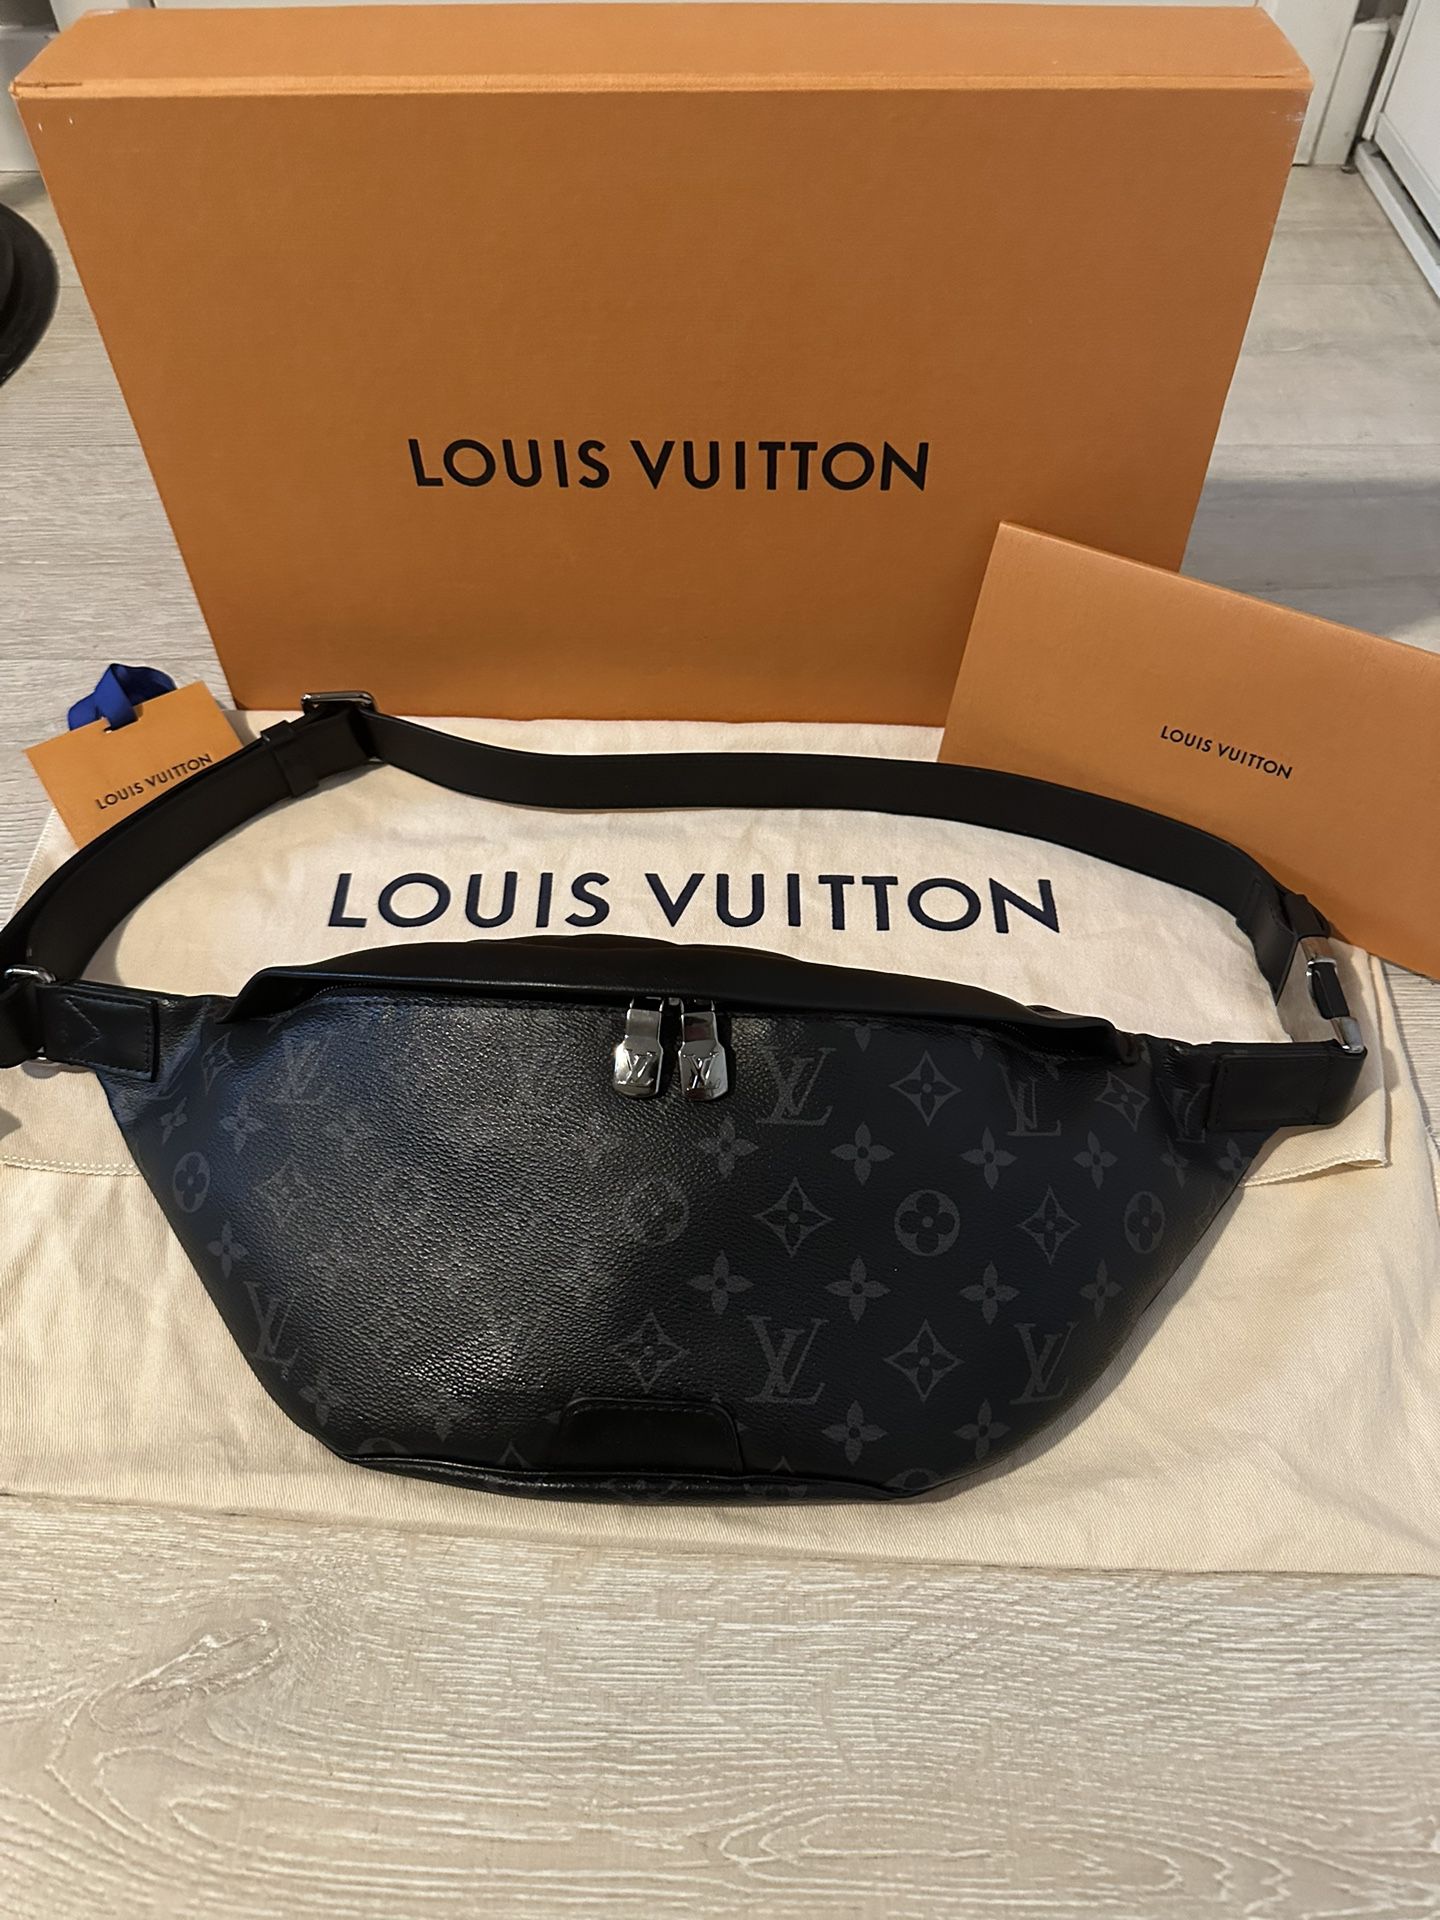 Shop Louis Vuitton Discovery Discovery bumbag pm (M46035) by